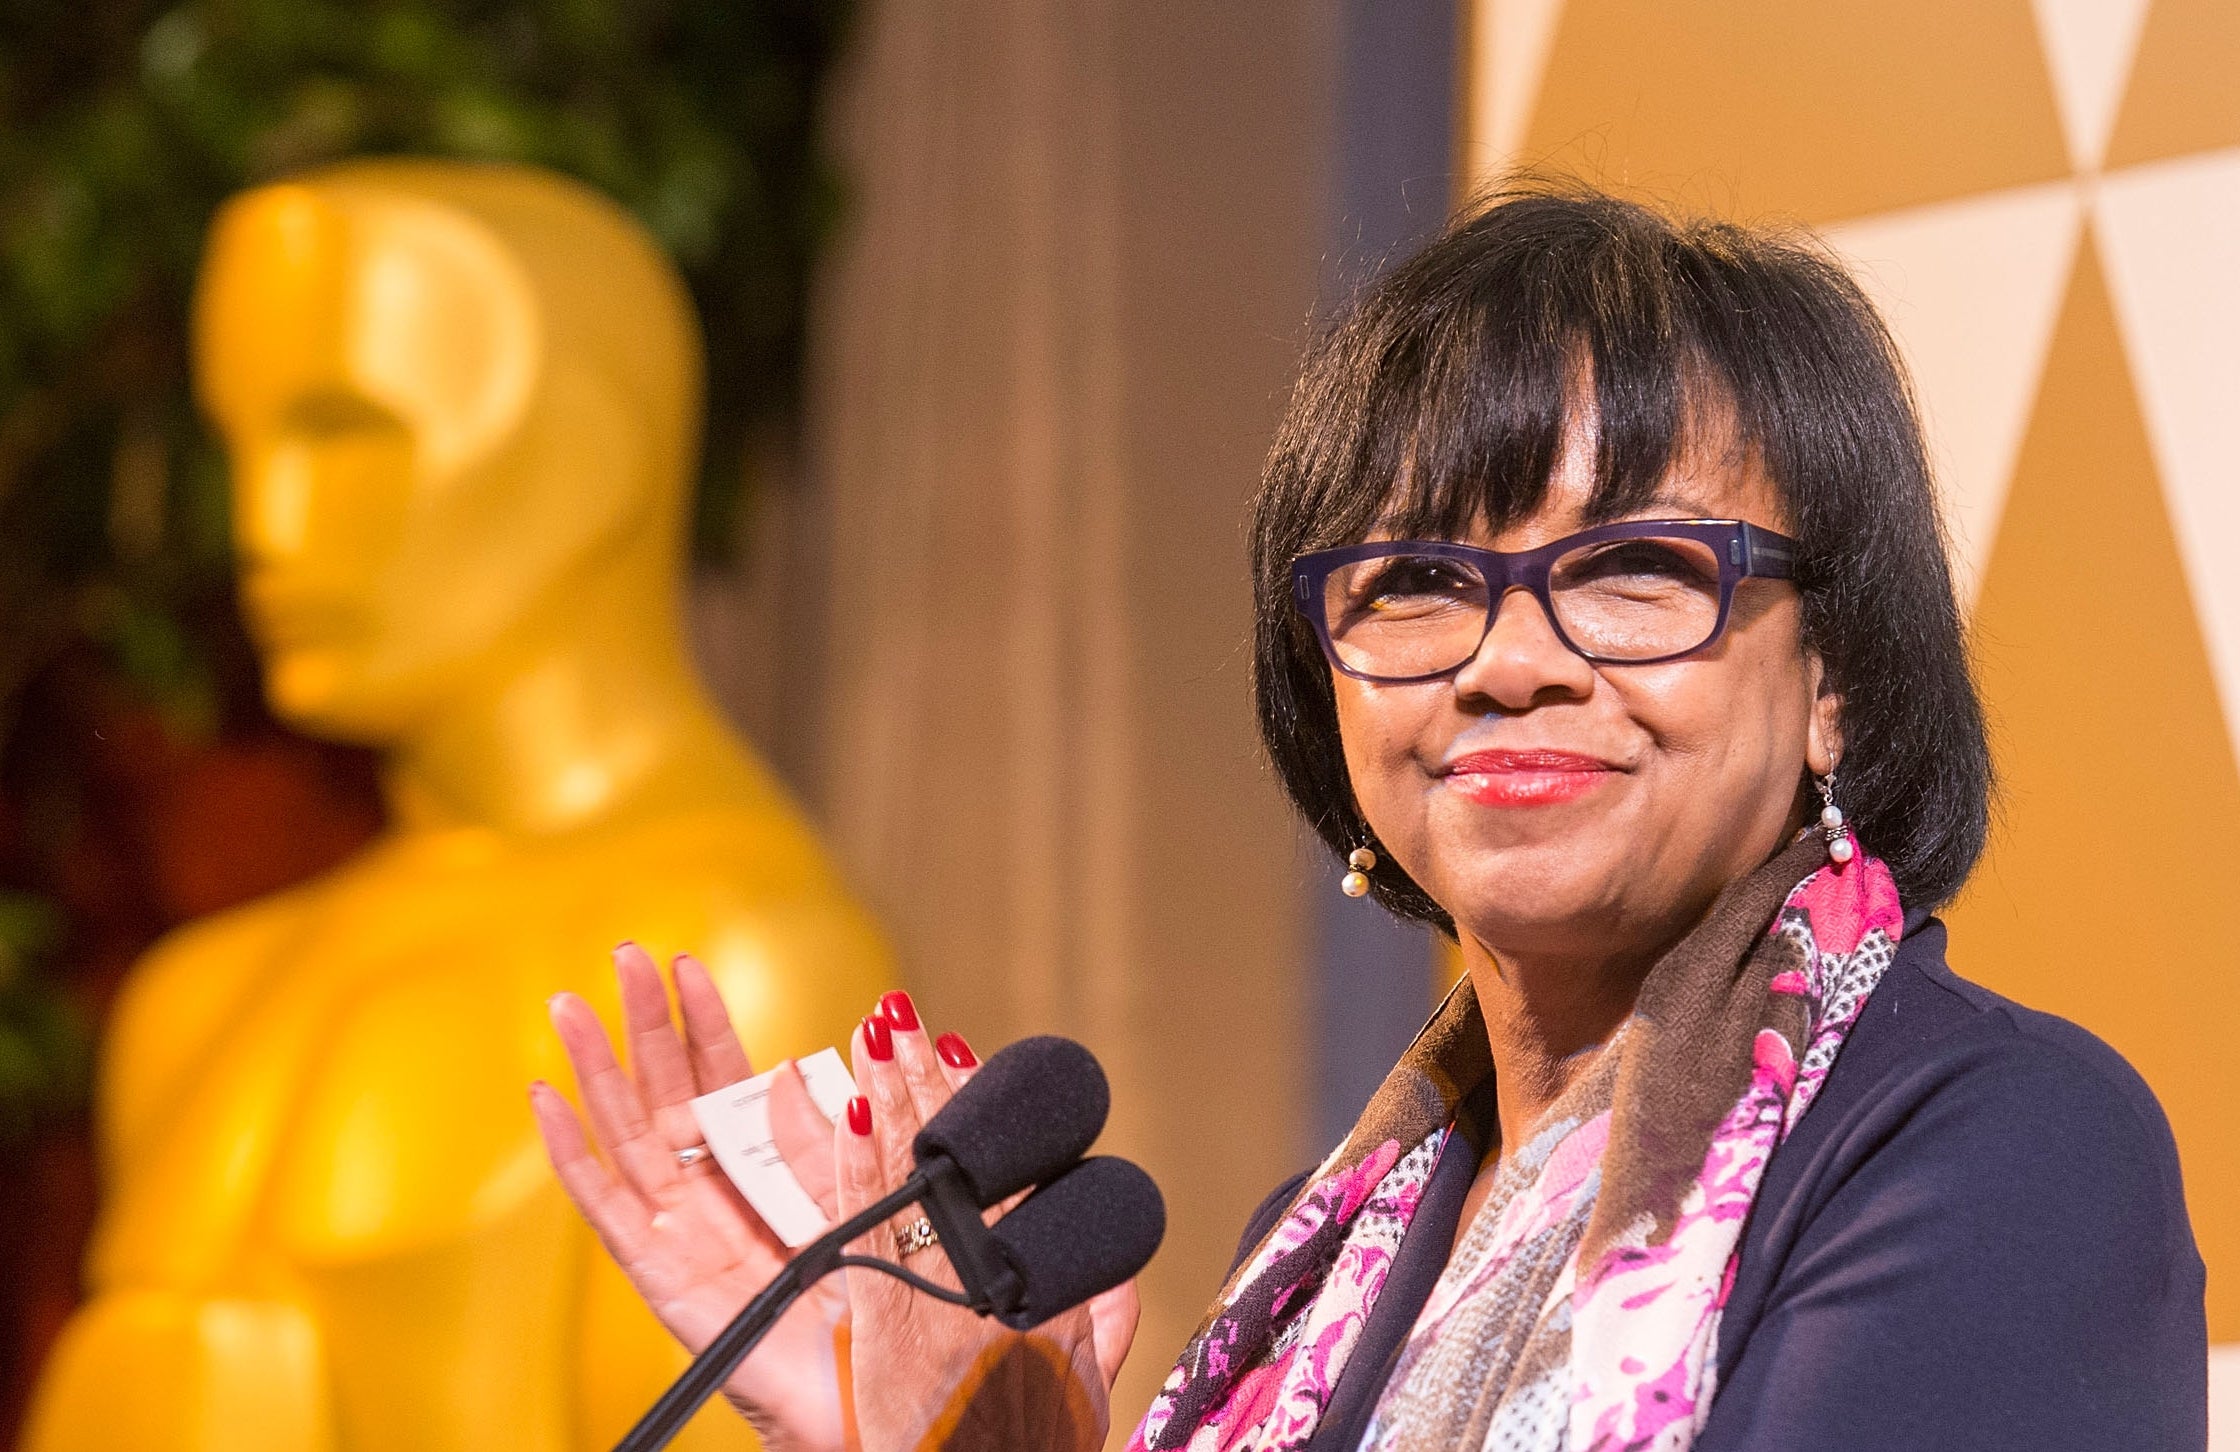 Academy of Motion Picture Arts and Sciences president, Cheryl Boone Isaacs